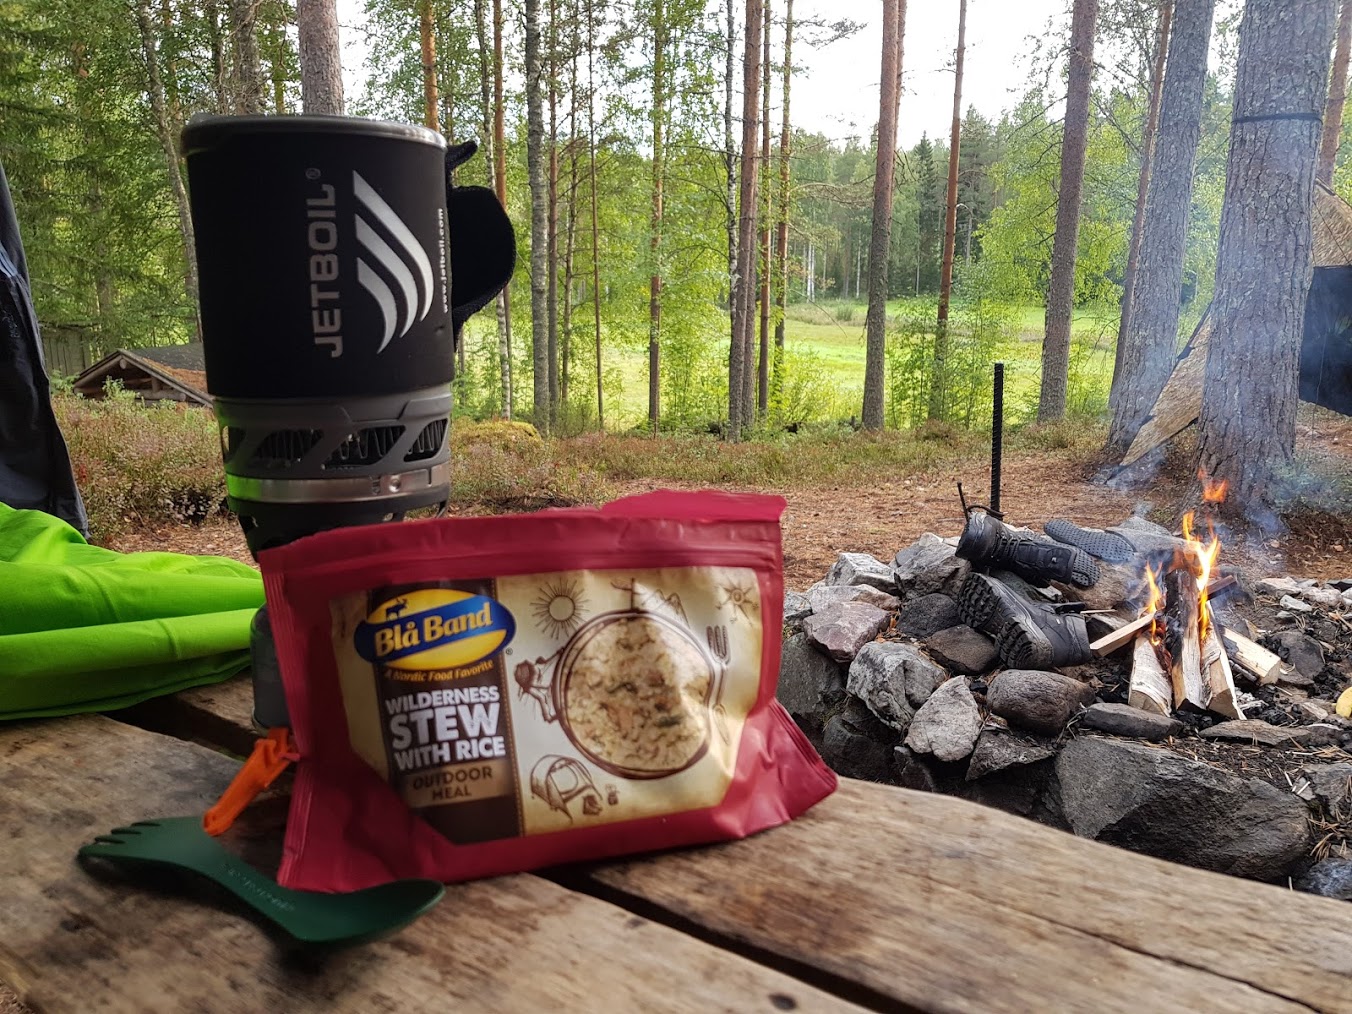 Jetboil and a bag meal next to a camp fire.